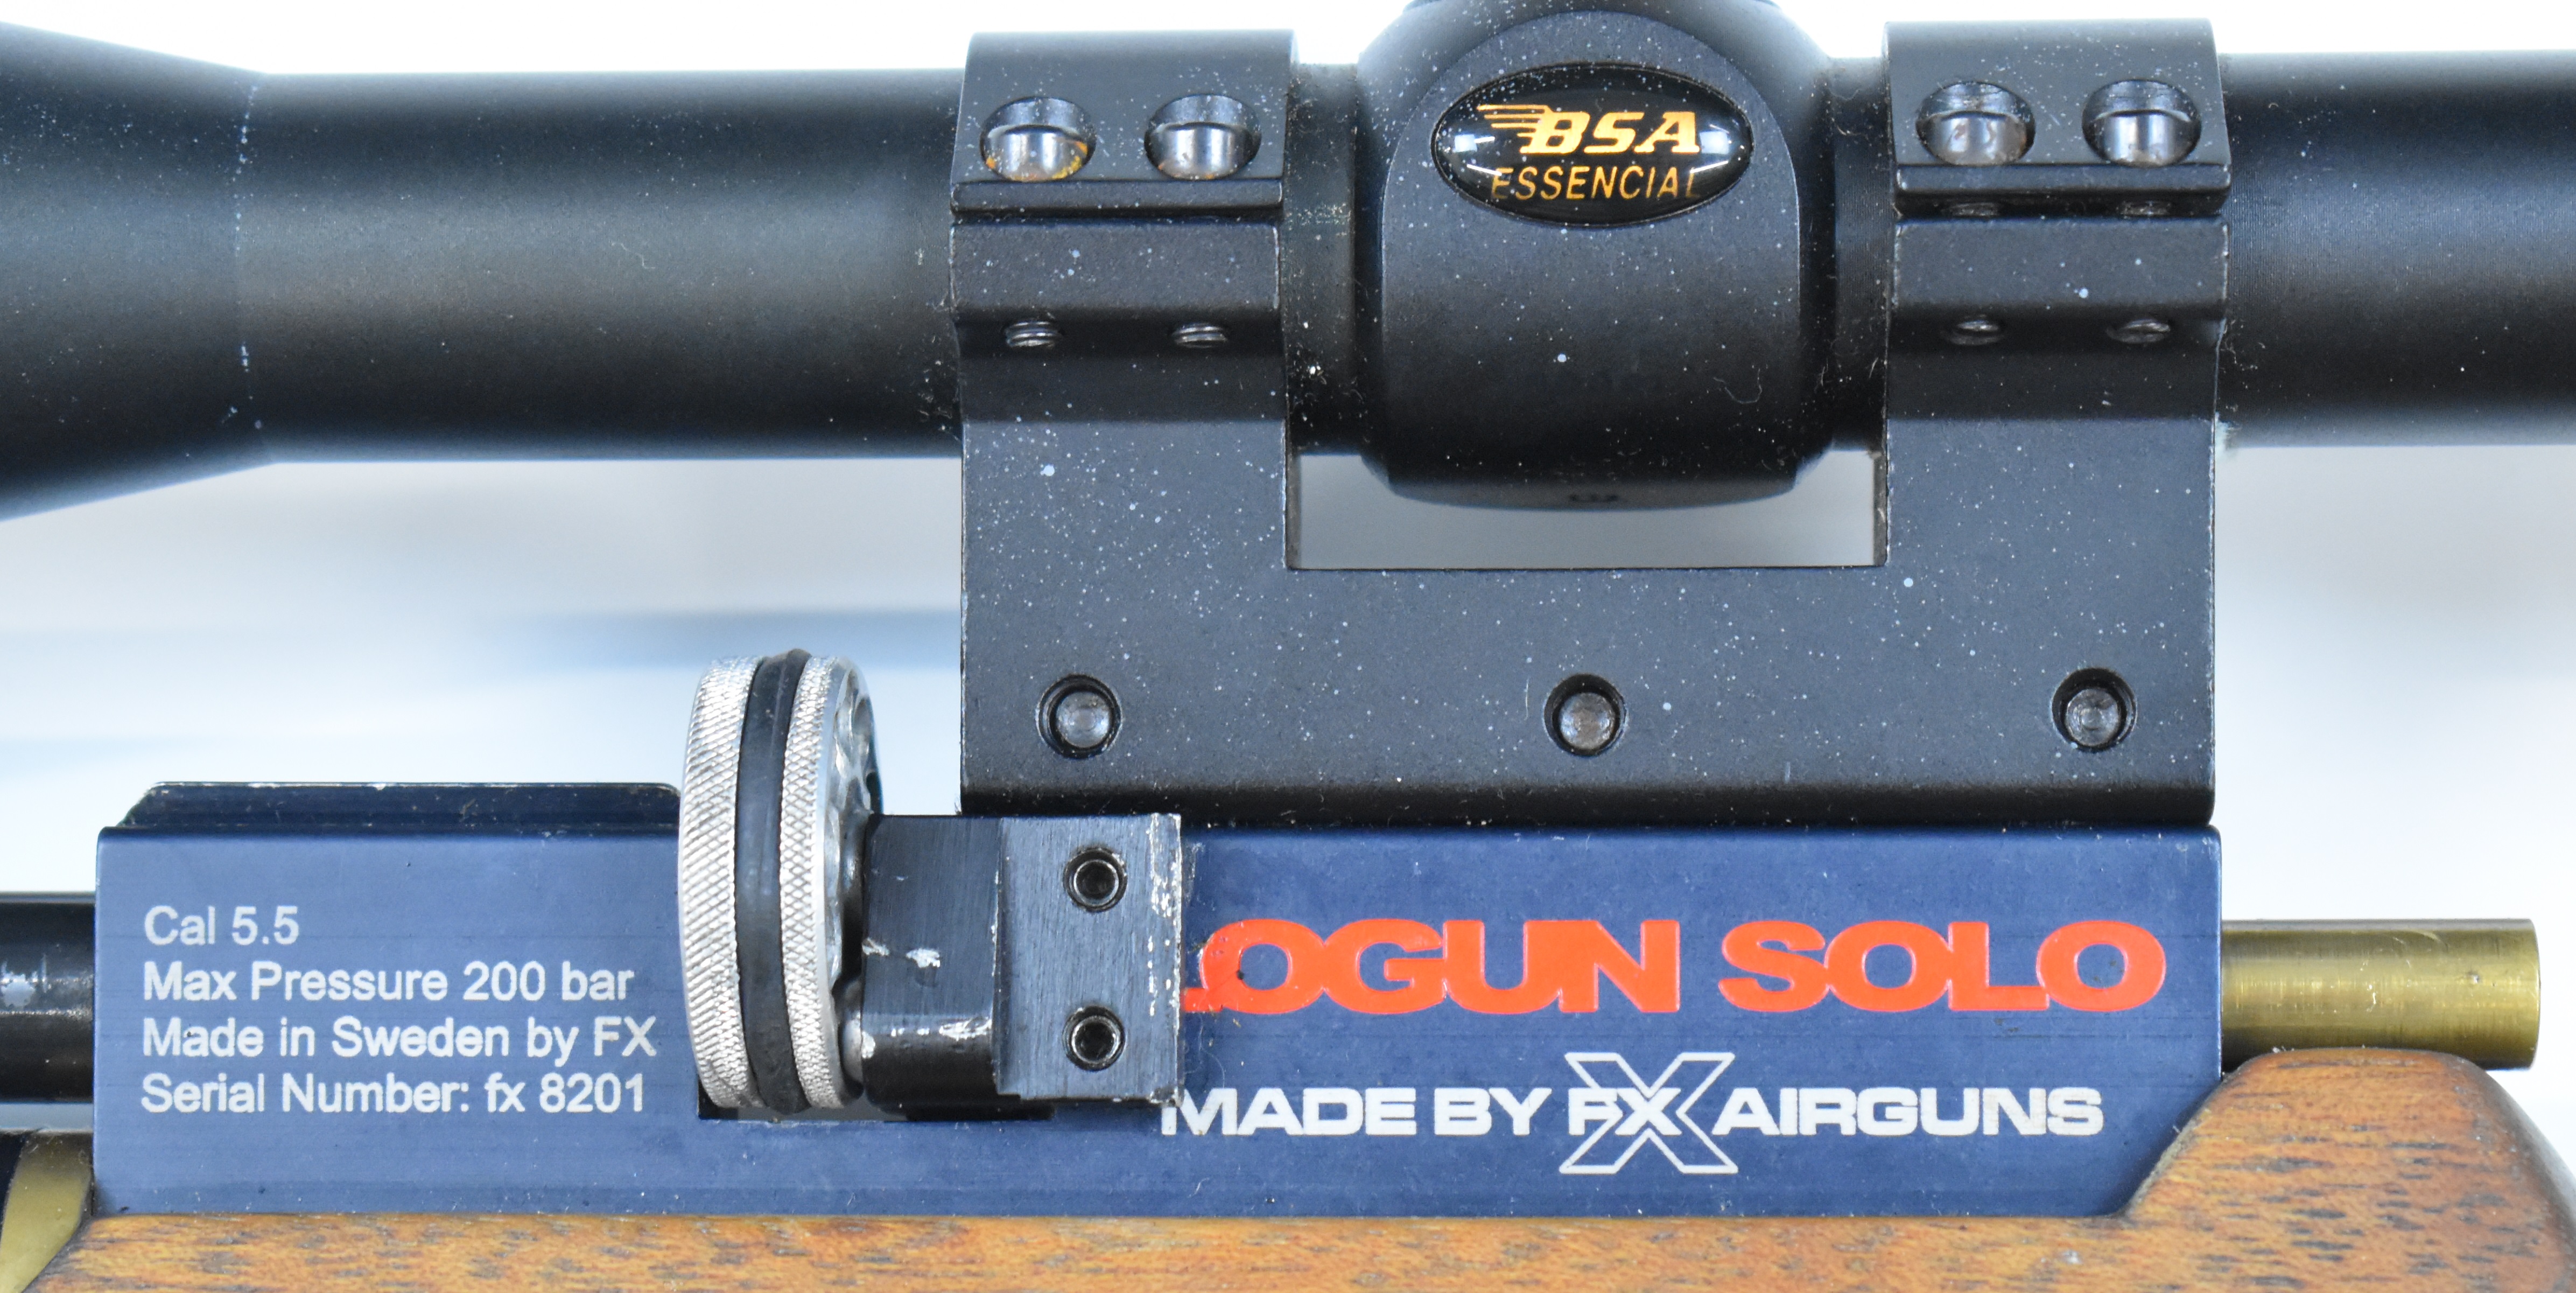 FX Logun Solo .22 PCP air rifle with chequered semi-pistol grip and forend, raised cheek piece, - Image 10 of 10